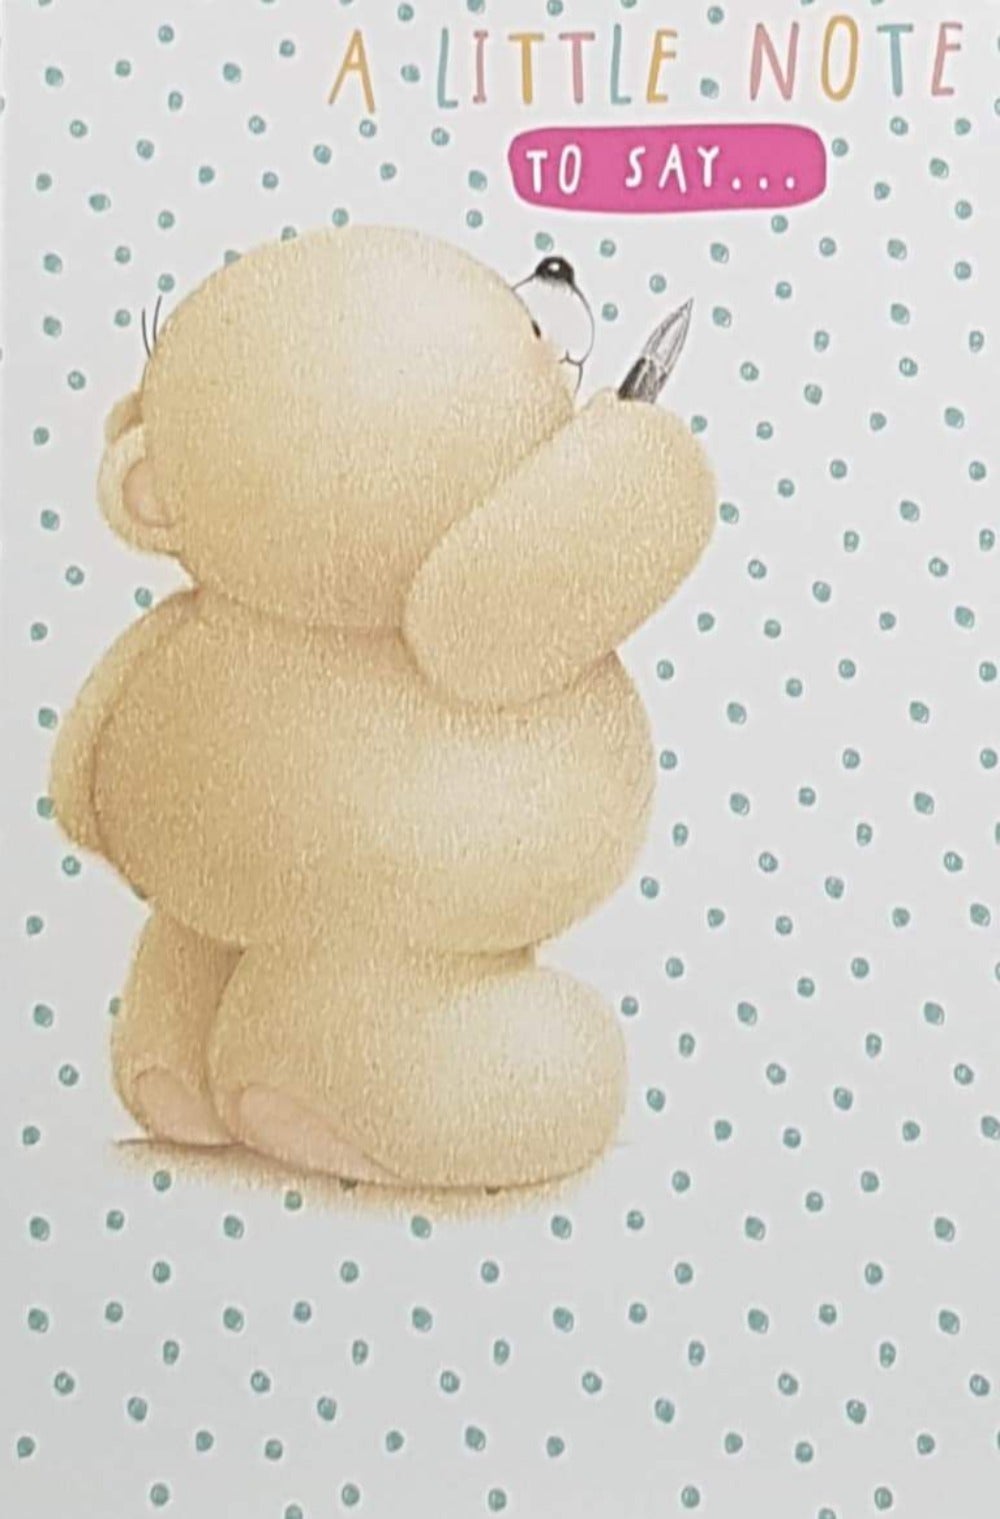 Pack Of Cards - Cute Teddy Sending A Little Note To Say & Green Spots